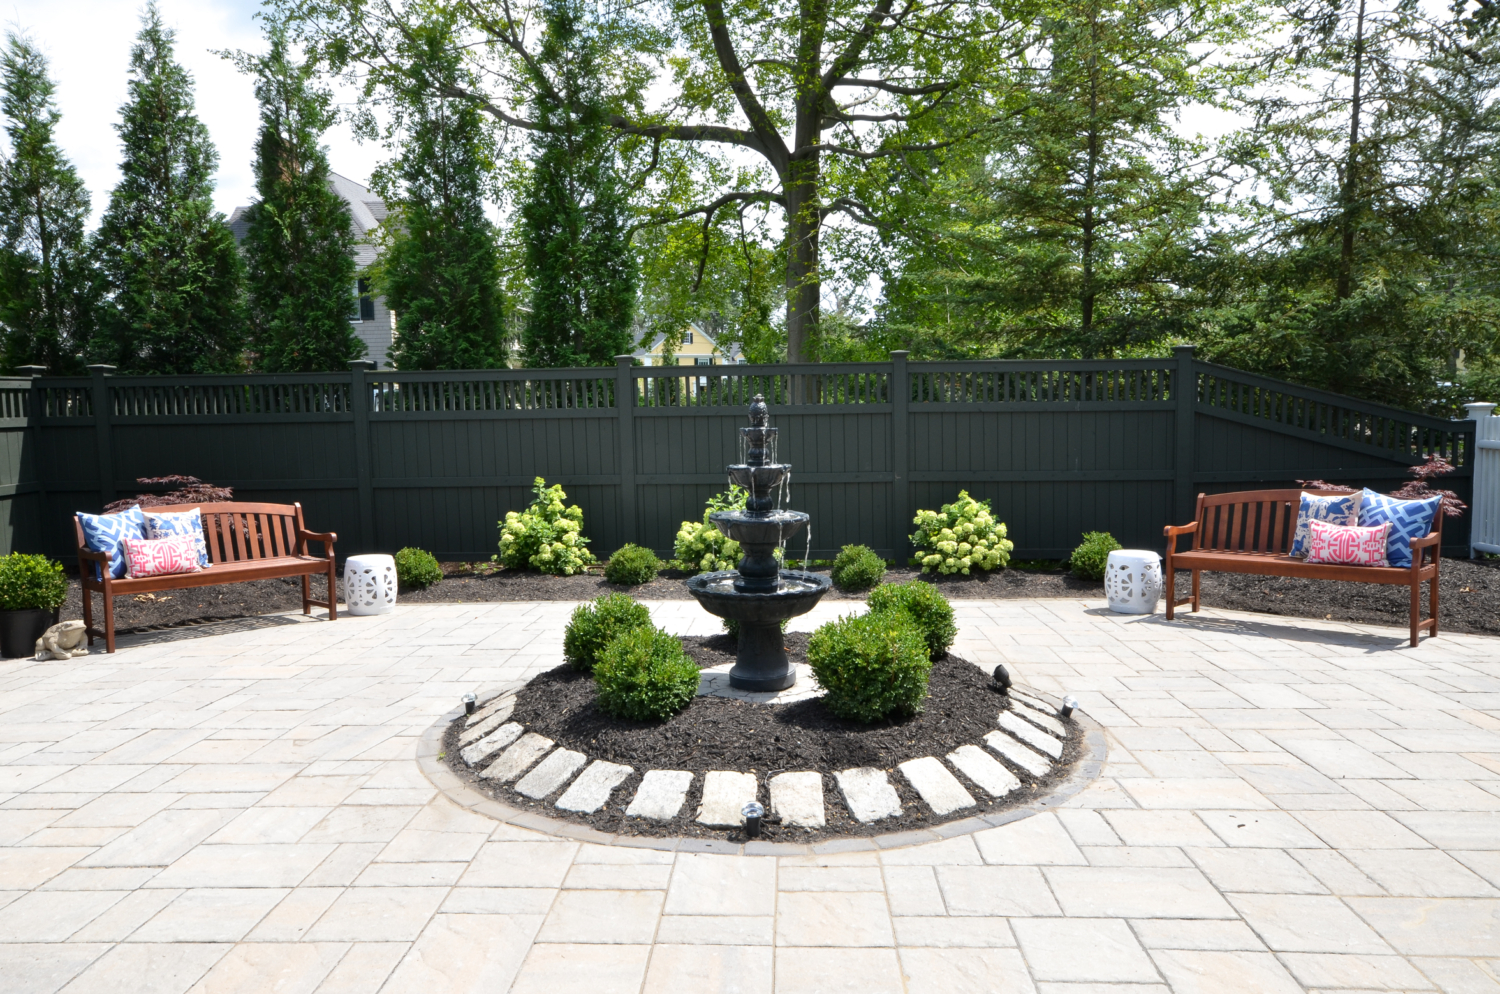 Custom paver patio with a fountain at the center, classic outdoor living space ideas for decorating your deck or patio